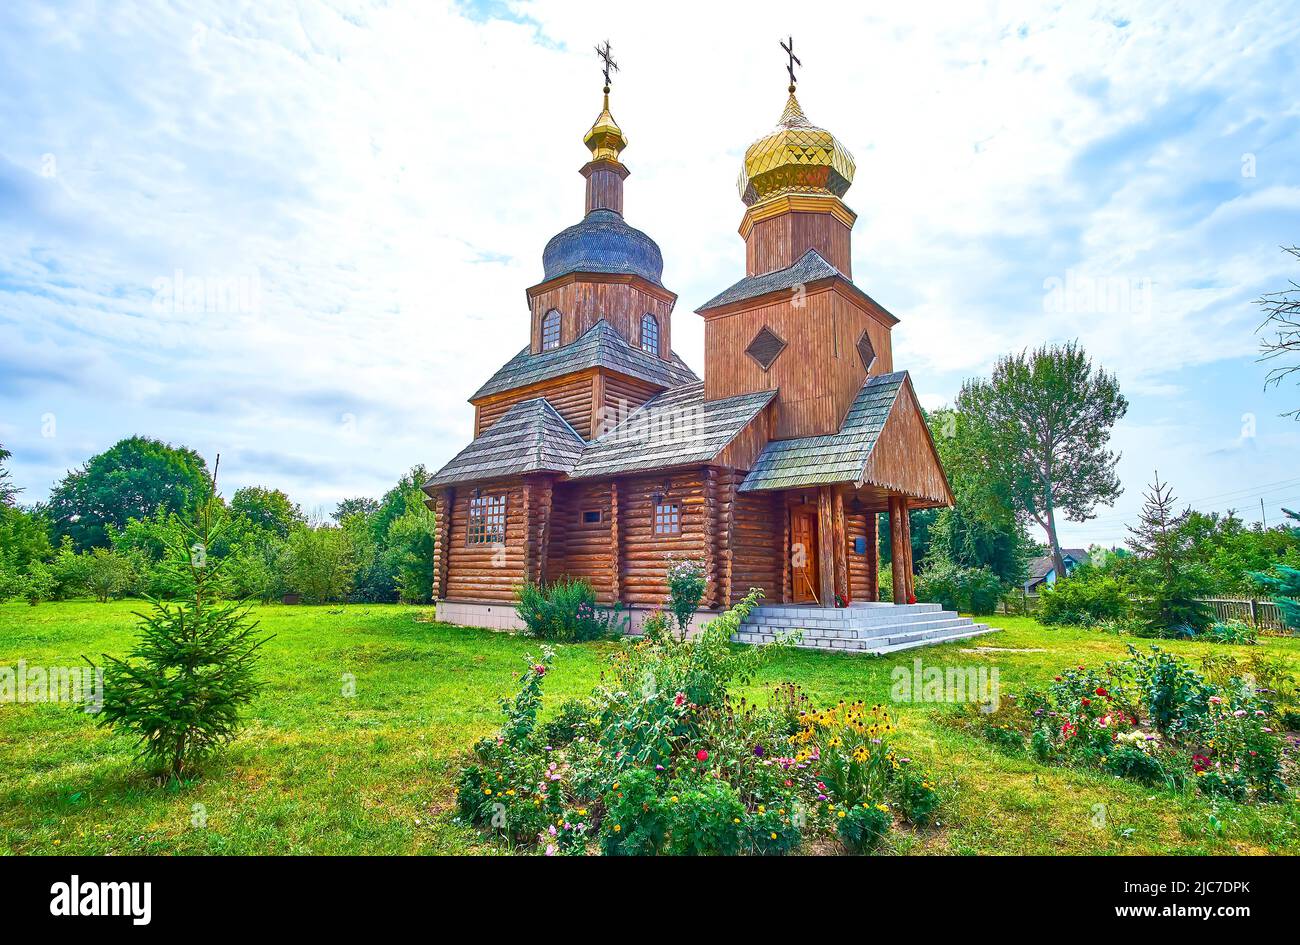 The scenic wooden Church of the Intercession with golden domes and its garden in Cherevki village, Ukraine Stock Photo